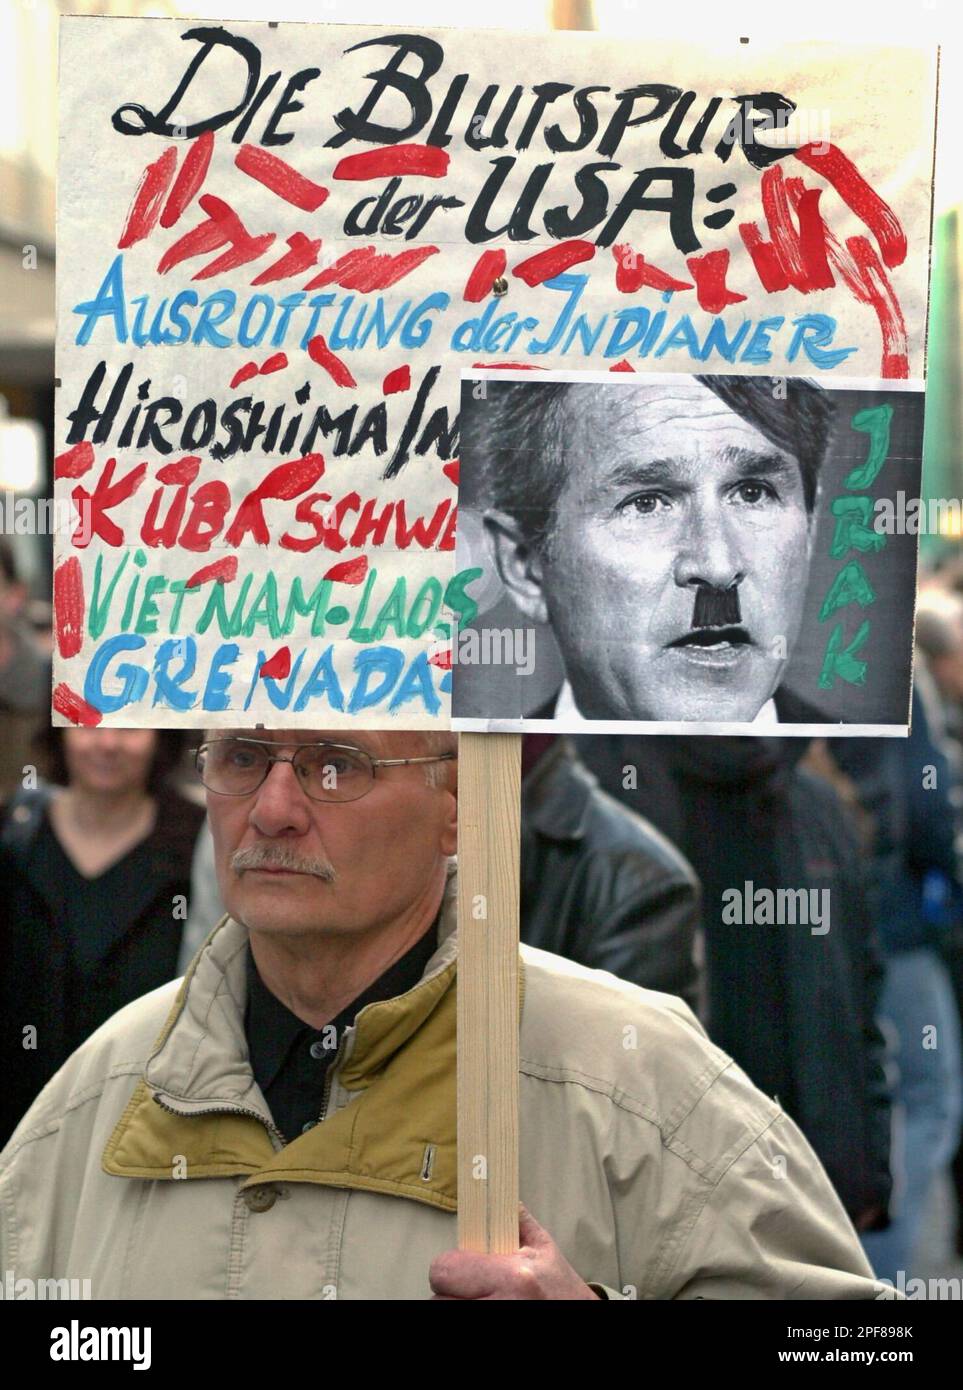 An unidentified man carries a banner with a portrait of U.S. President Bush made up to resemble Adolf Hitler during a demonstration in the city of Leipzig, eastern Germany, Monday, March 24, 2003. Hundreds of people gathered for a peace rally against the war in Iraq after a peace prayer in the St. Nikolai church. The protest march took place in the tradition of the "Monday demonstrations" of 1989, which finally led to the peaceful revolution in former East Germany. The banner reads: "The Blood trail ofthe USA - Eradication of Indians, Hiroshima, Cuba/ Bay of Pigs, Vietnam, Grenada..." (AP Phot Stock Photo